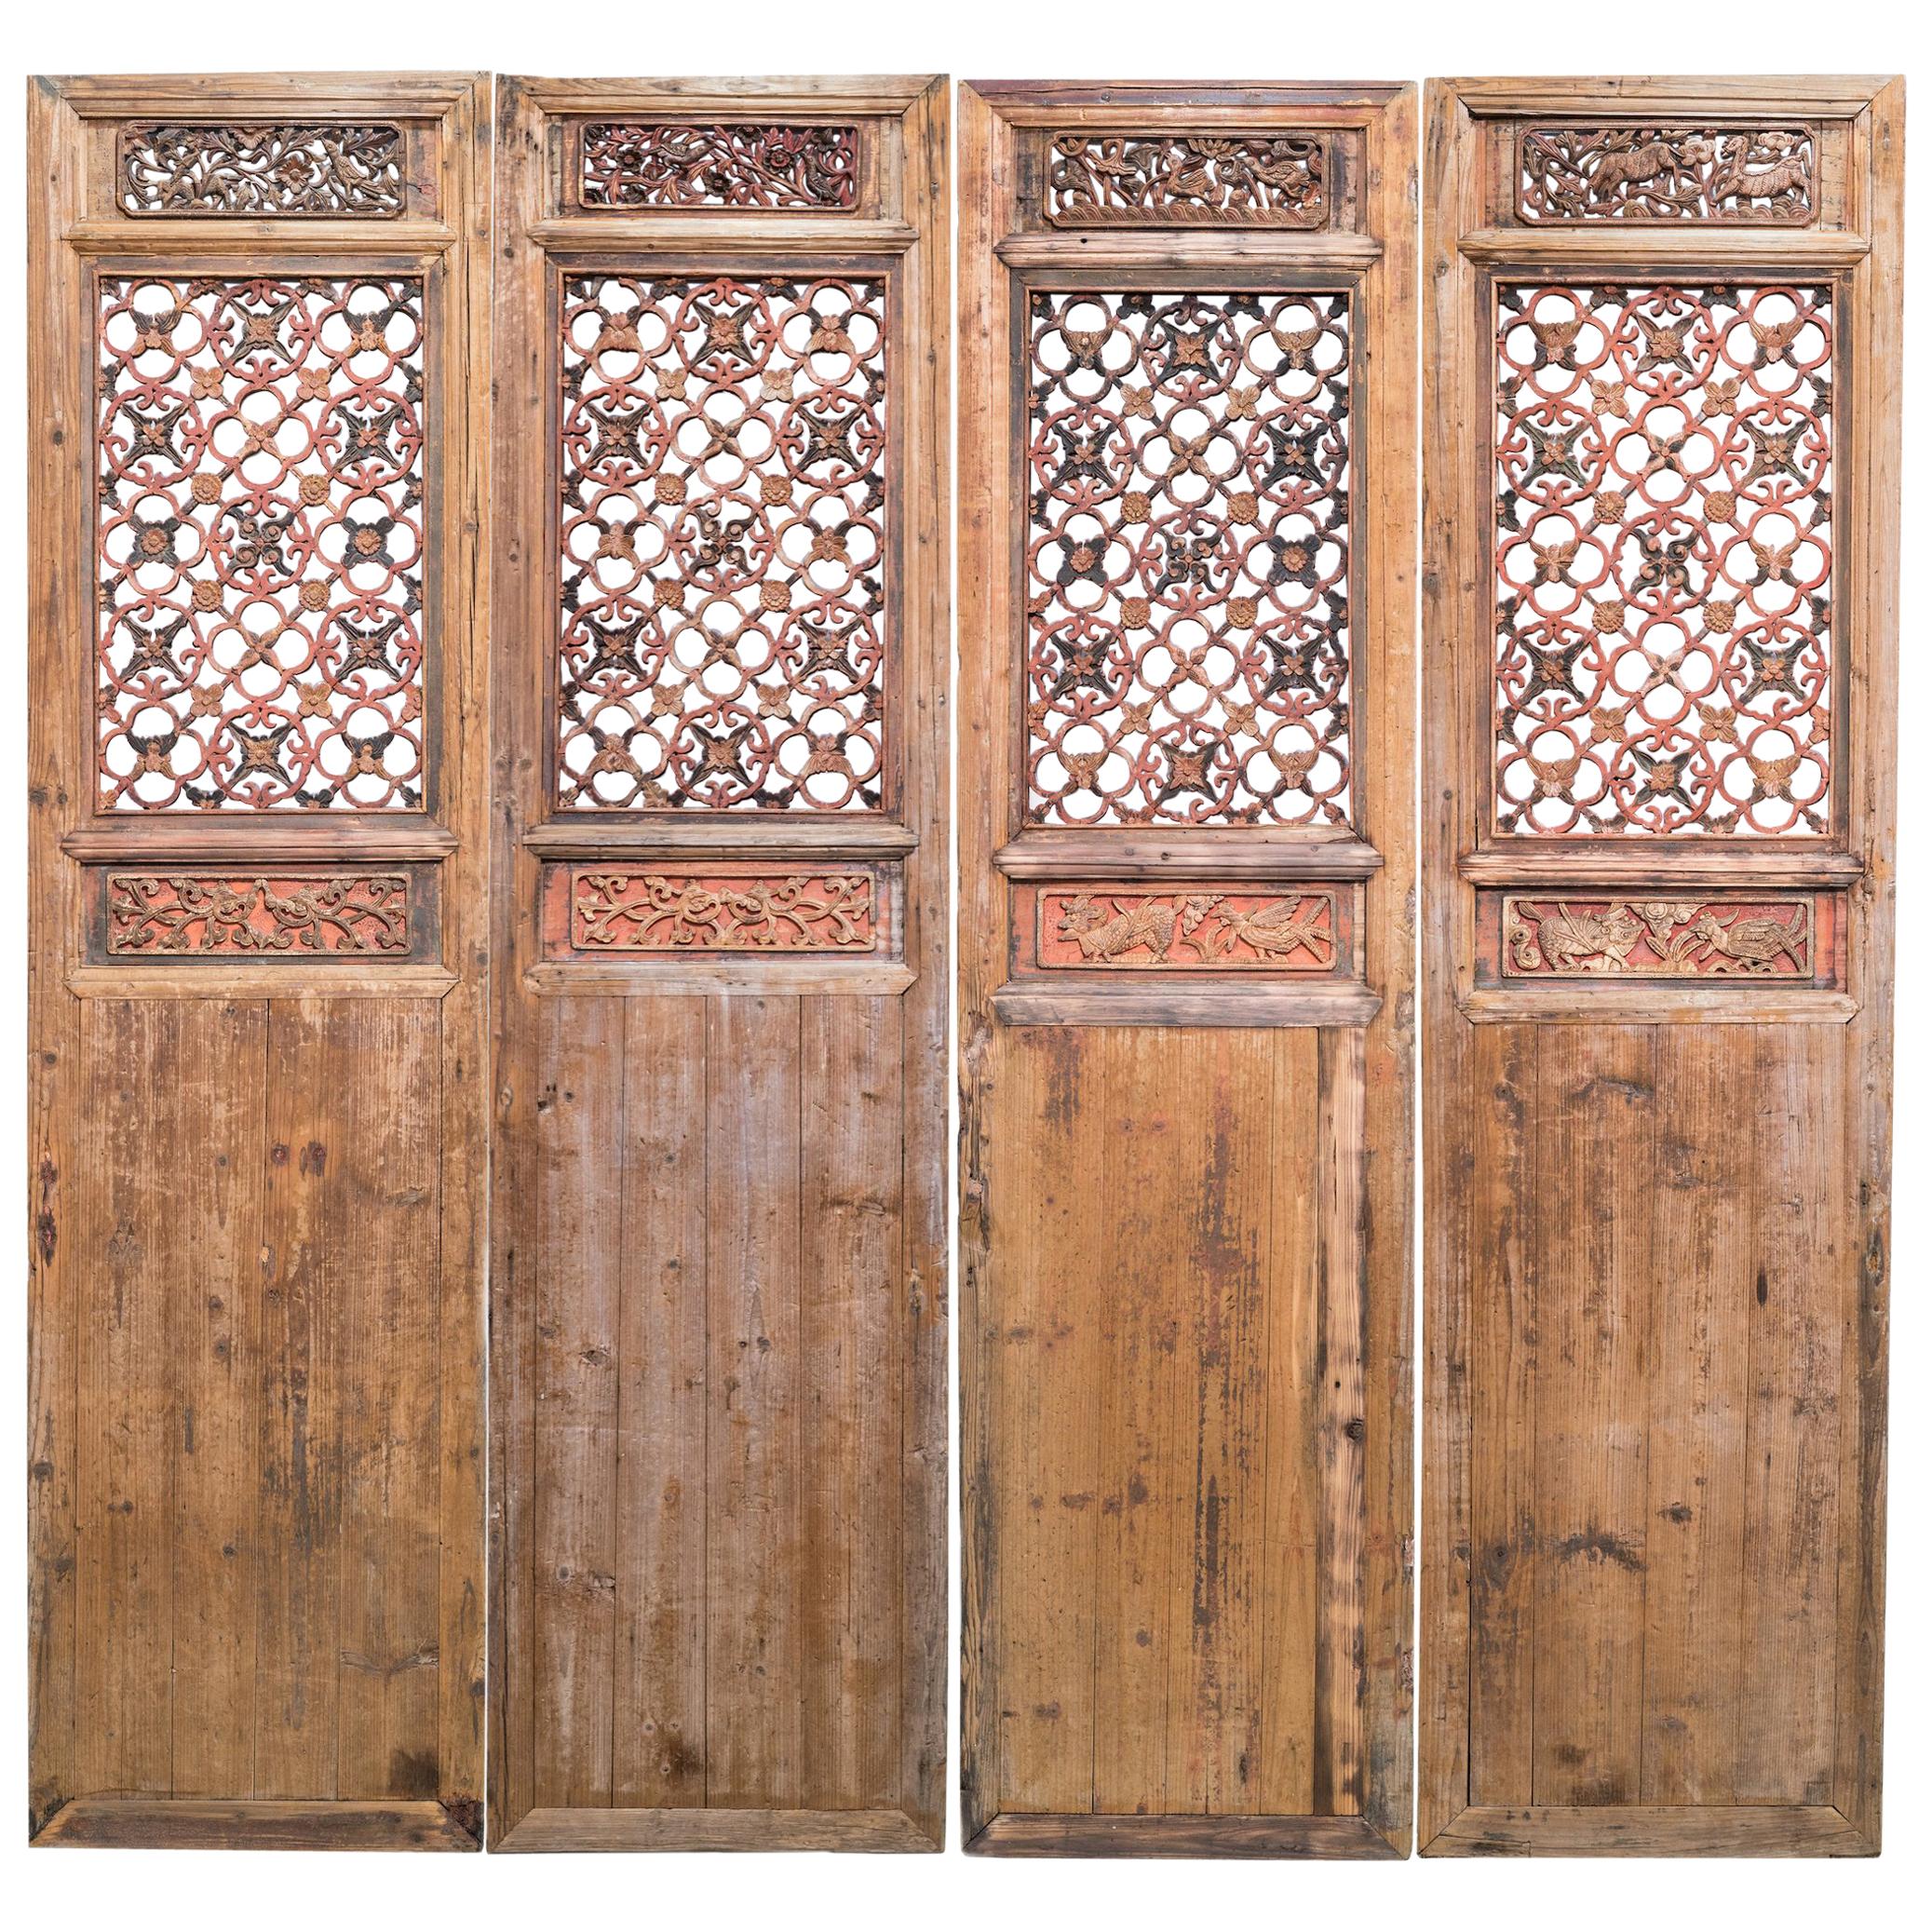 Late 19th Century Door Panels with Latticework and Carvings For Sale